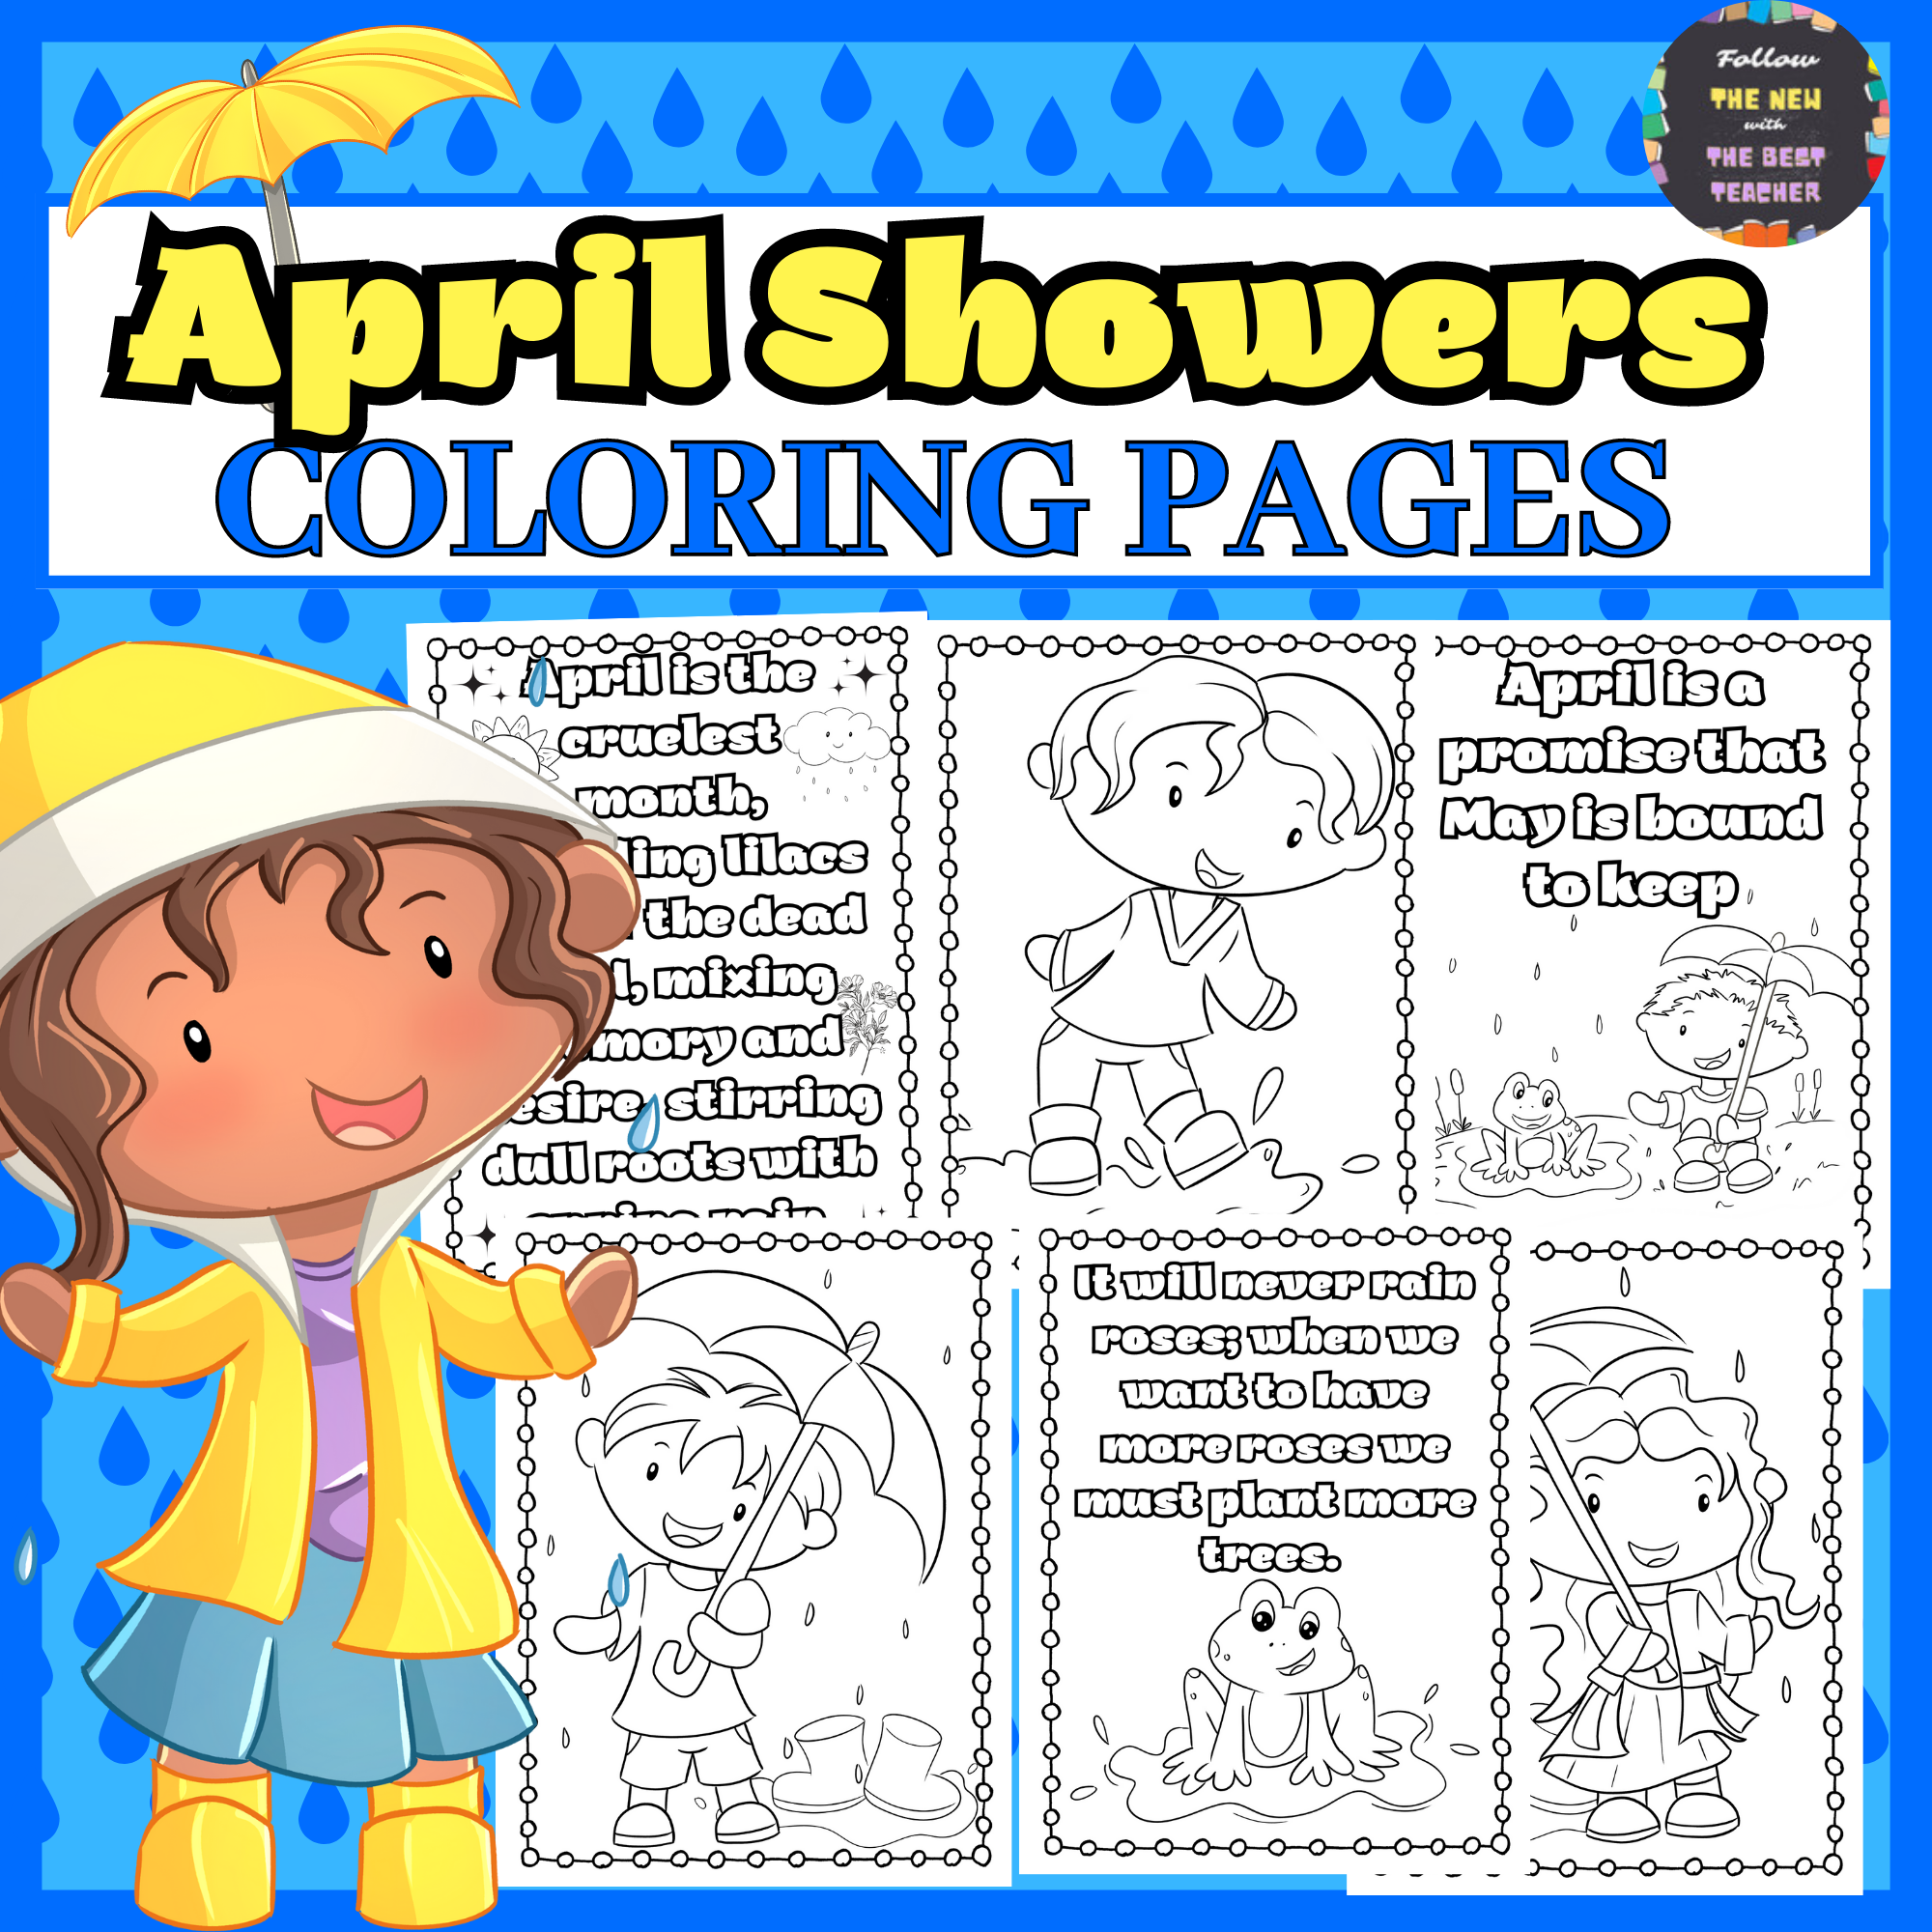 April showers coloring pages spring showers coloring sheets with quotes made by teachers